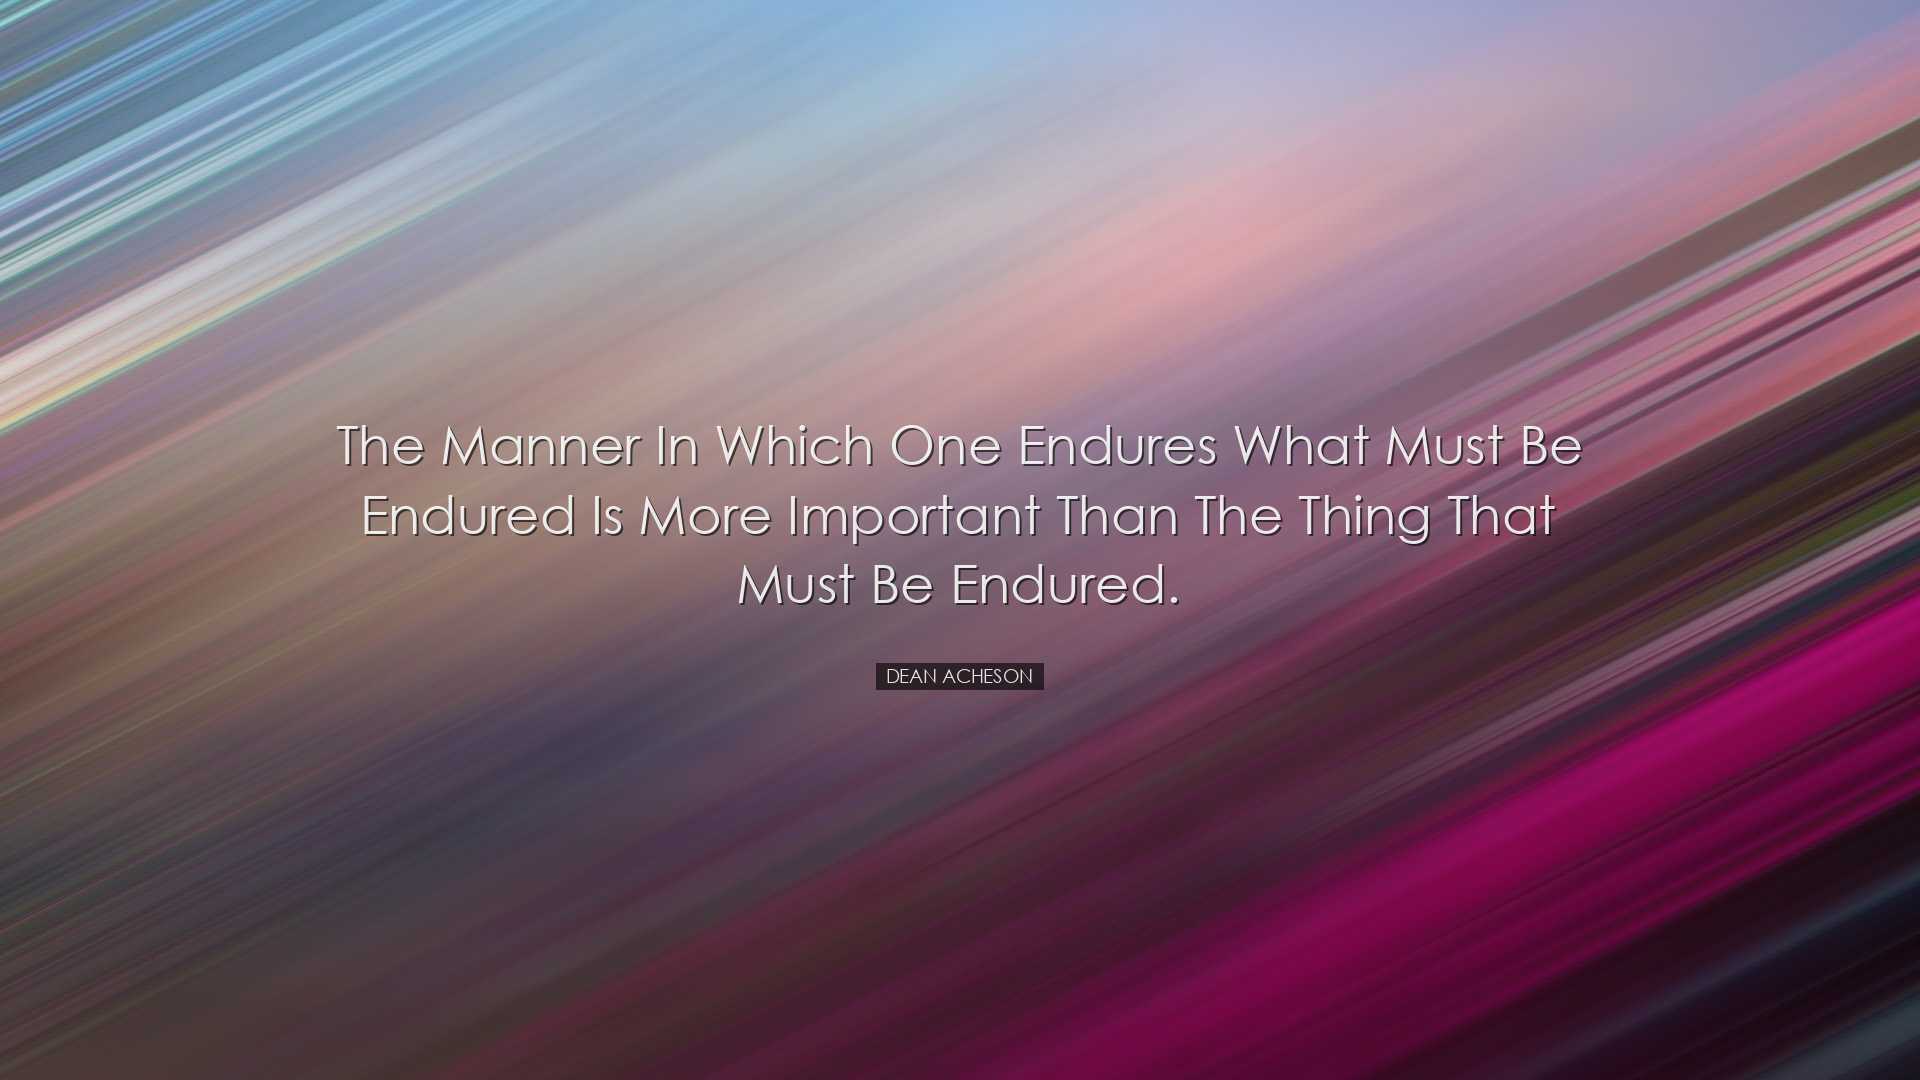 The manner in which one endures what must be endured is more impor